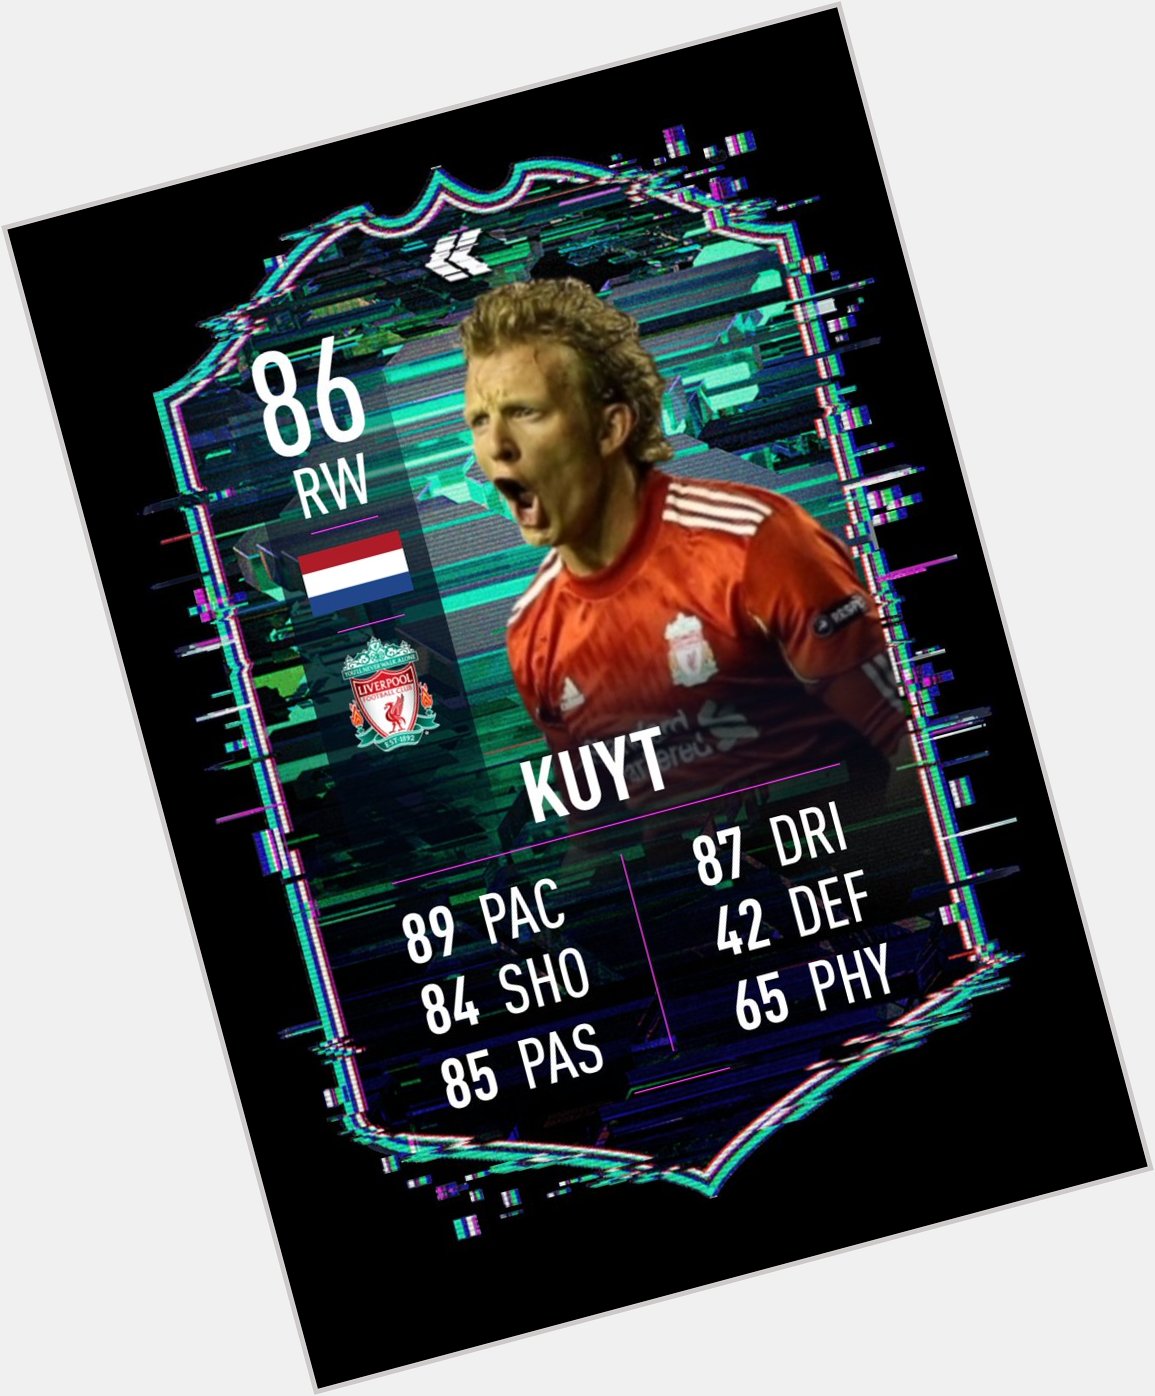 Happy birthday to Dirk Kuyt Federico Valverde and Stewart Downing   